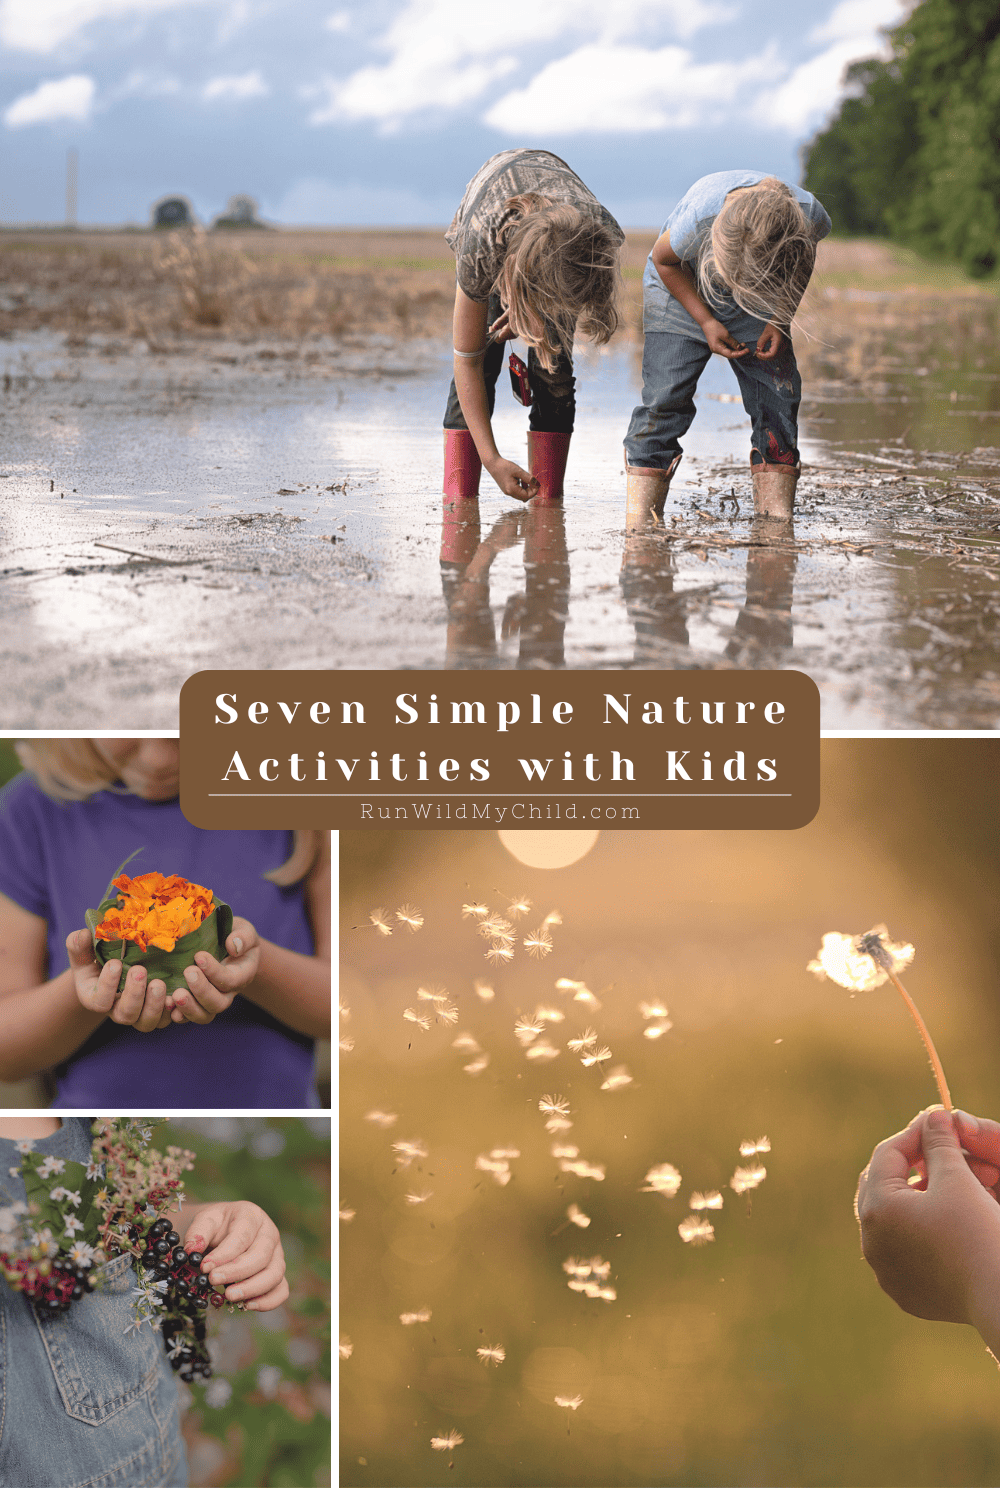 Nature activities with kids